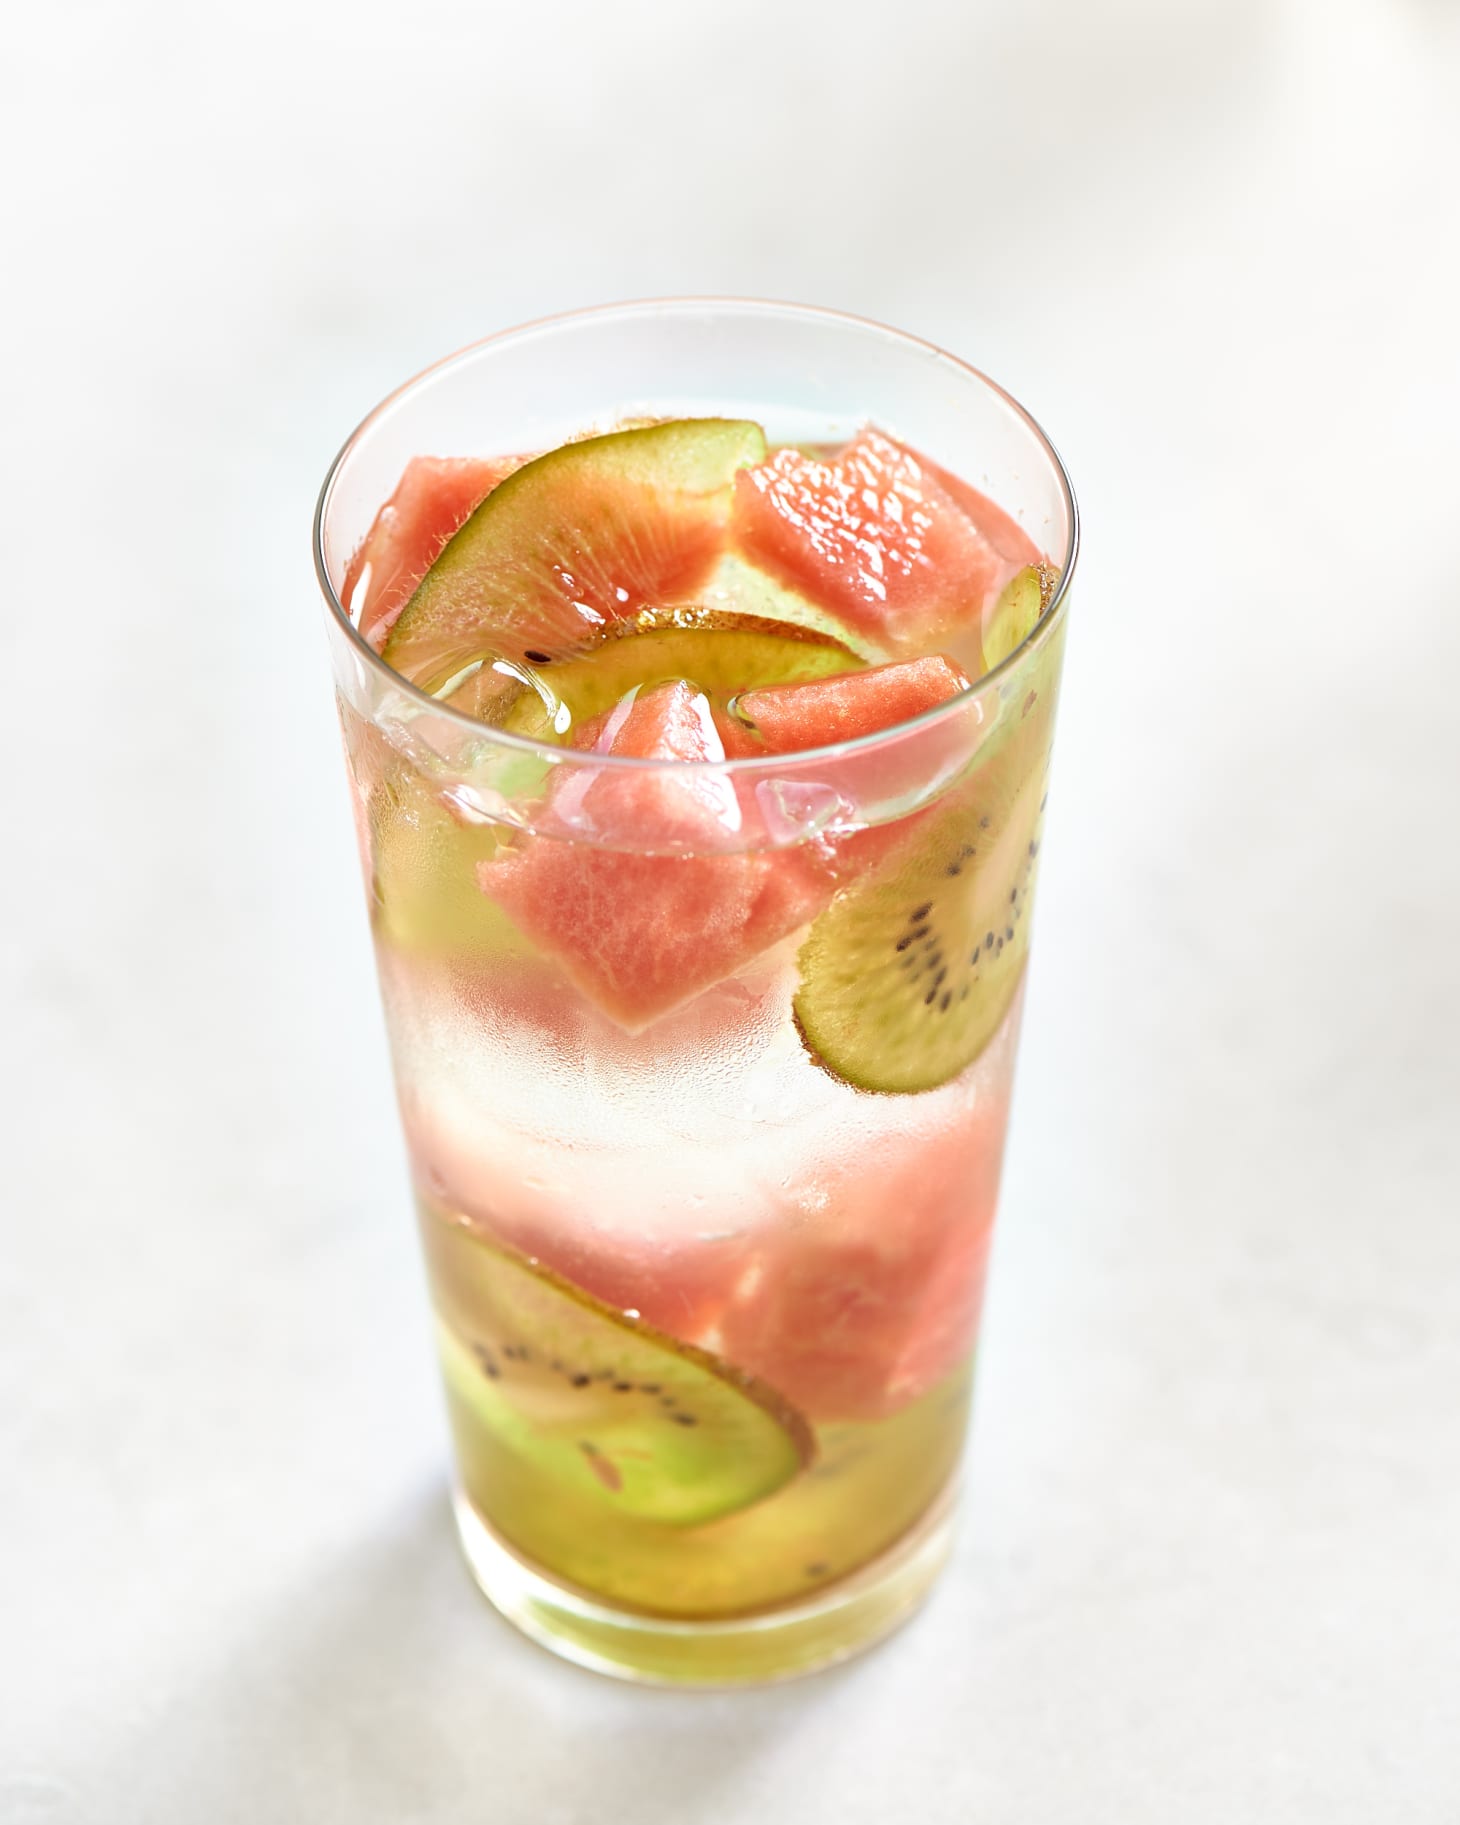 Infused Water Recipes - Fruit Herb Infused Water | Kitchn